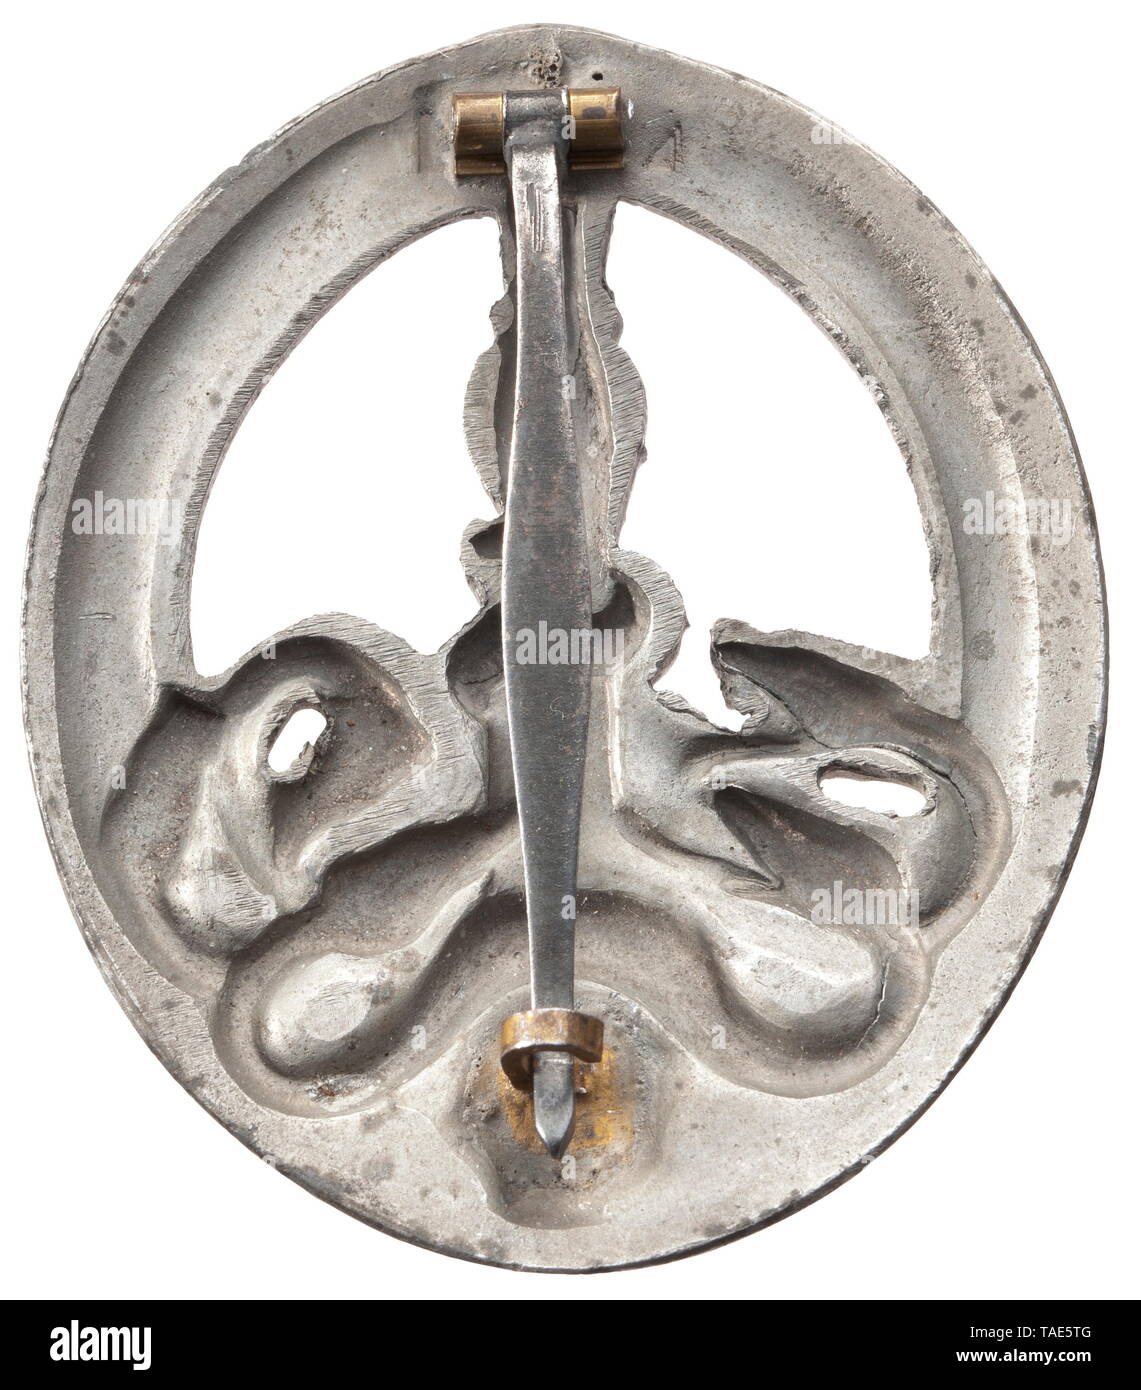 An Anti-Partisan Badge in Bronze Half-hollow zinc issue of maker Juncker, Berlin (bronzing almost completely gone). Two cutouts, magnetic attachment pin and clasp. Unquestionable original with typical factory tool marks. Height 60 mm. Weight 34 g. historic, historical, 20th century, Additional-Rights-Clearance-Info-Not-Available Stock Photo